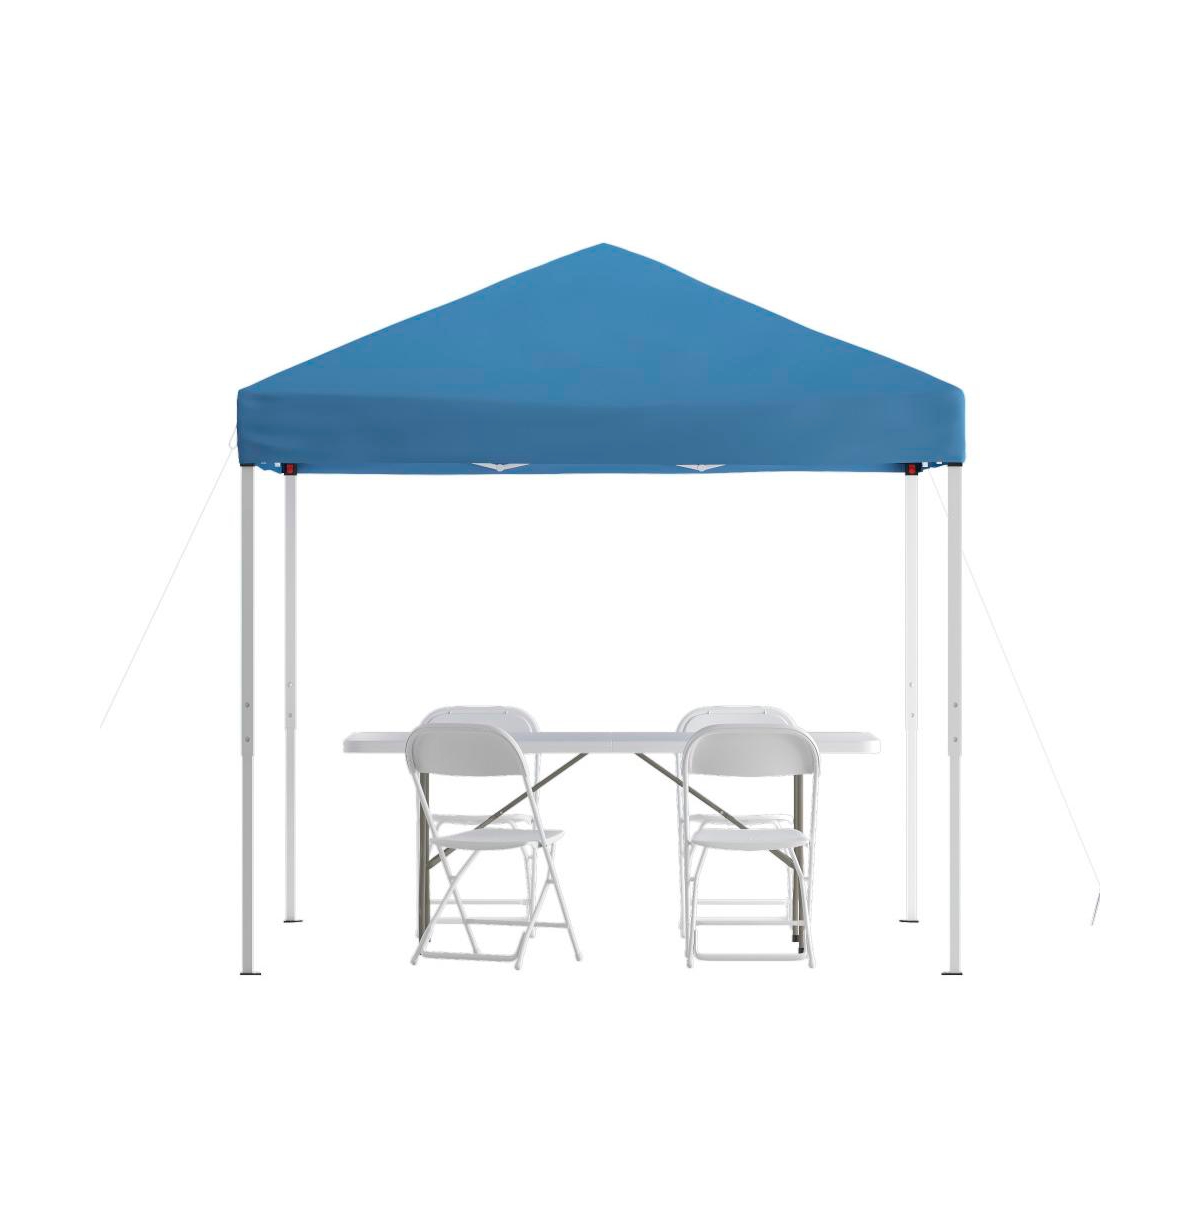 Outdoor Event/Tailgate Set With Pop Up Event Canopy With Carry Bag, Bi-Fold Table And 4 Folding Chairs - White